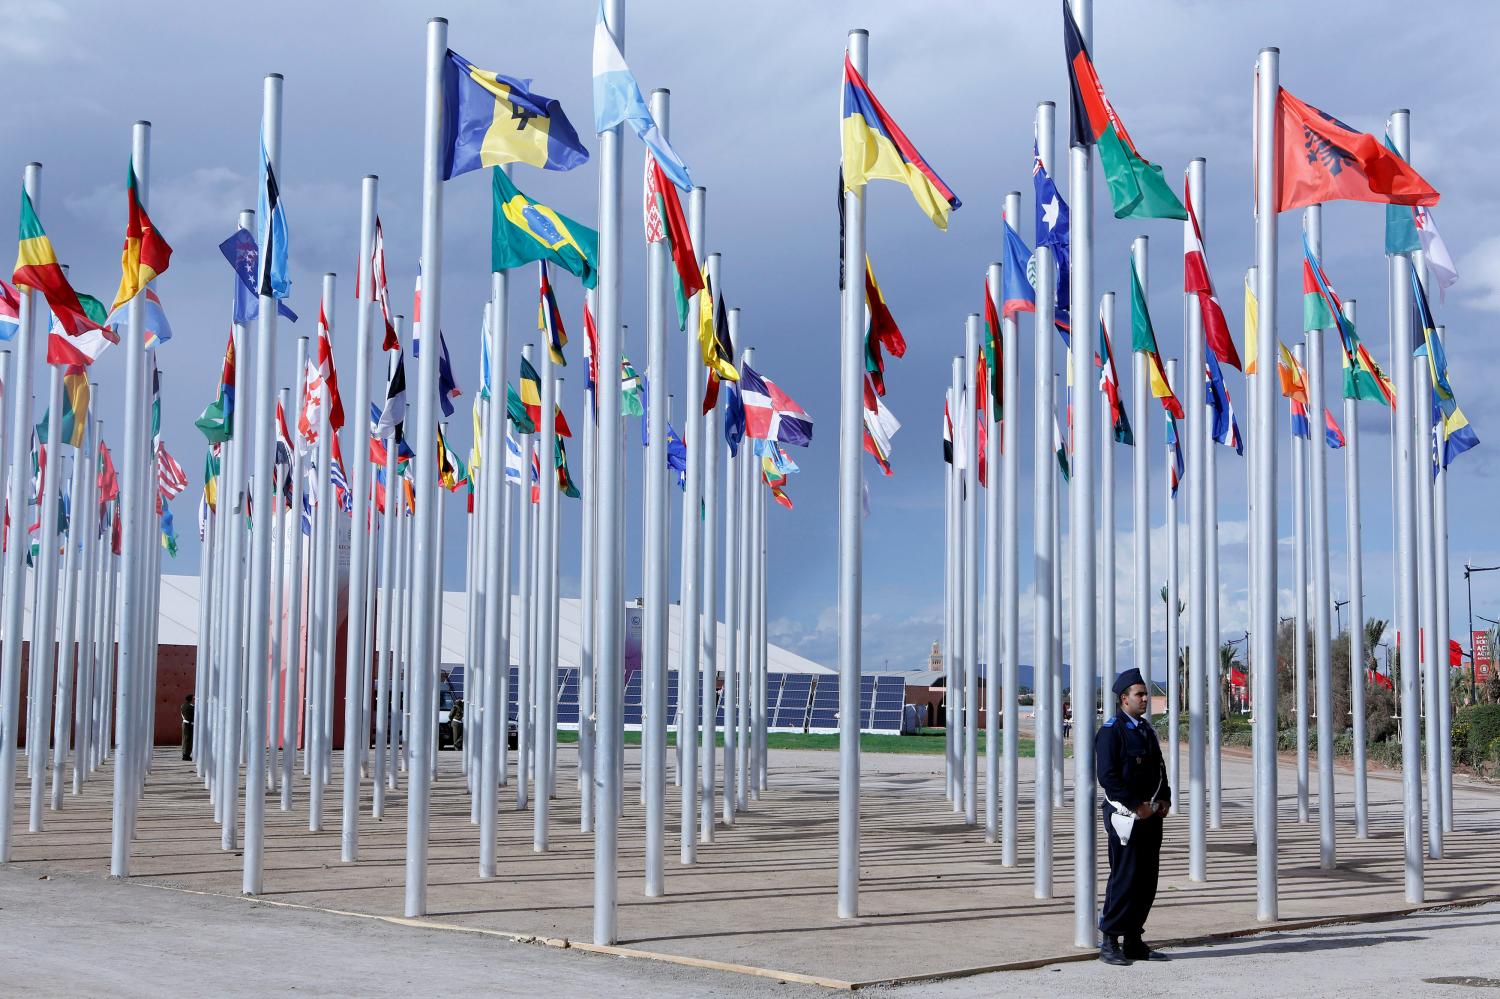 Flags from different countries are displayed at the World Climate Change Conference 2016 (COP22) in Marrakech, Morocco